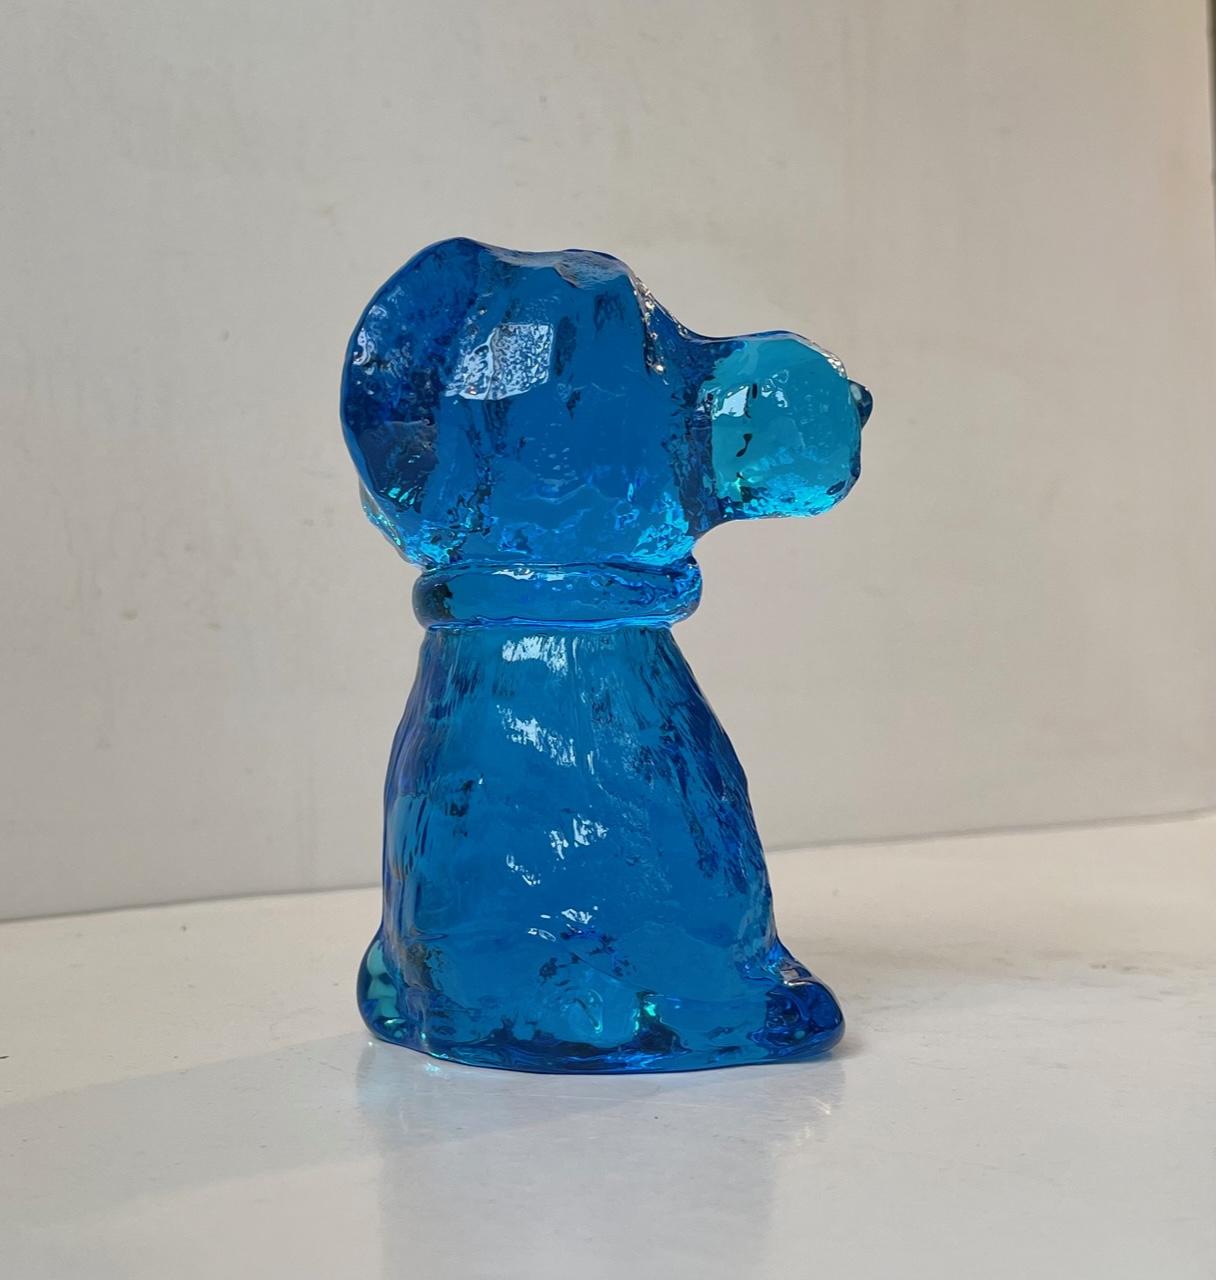 A rare blue dog figurine in hand-thrown glass. It catches and reflects light and the sun so beautifully. This design is attributed to Erik Höglund and probably made at Kosta Boda in Sweden during the 1960s or 70s. Height: 13.5 cm.